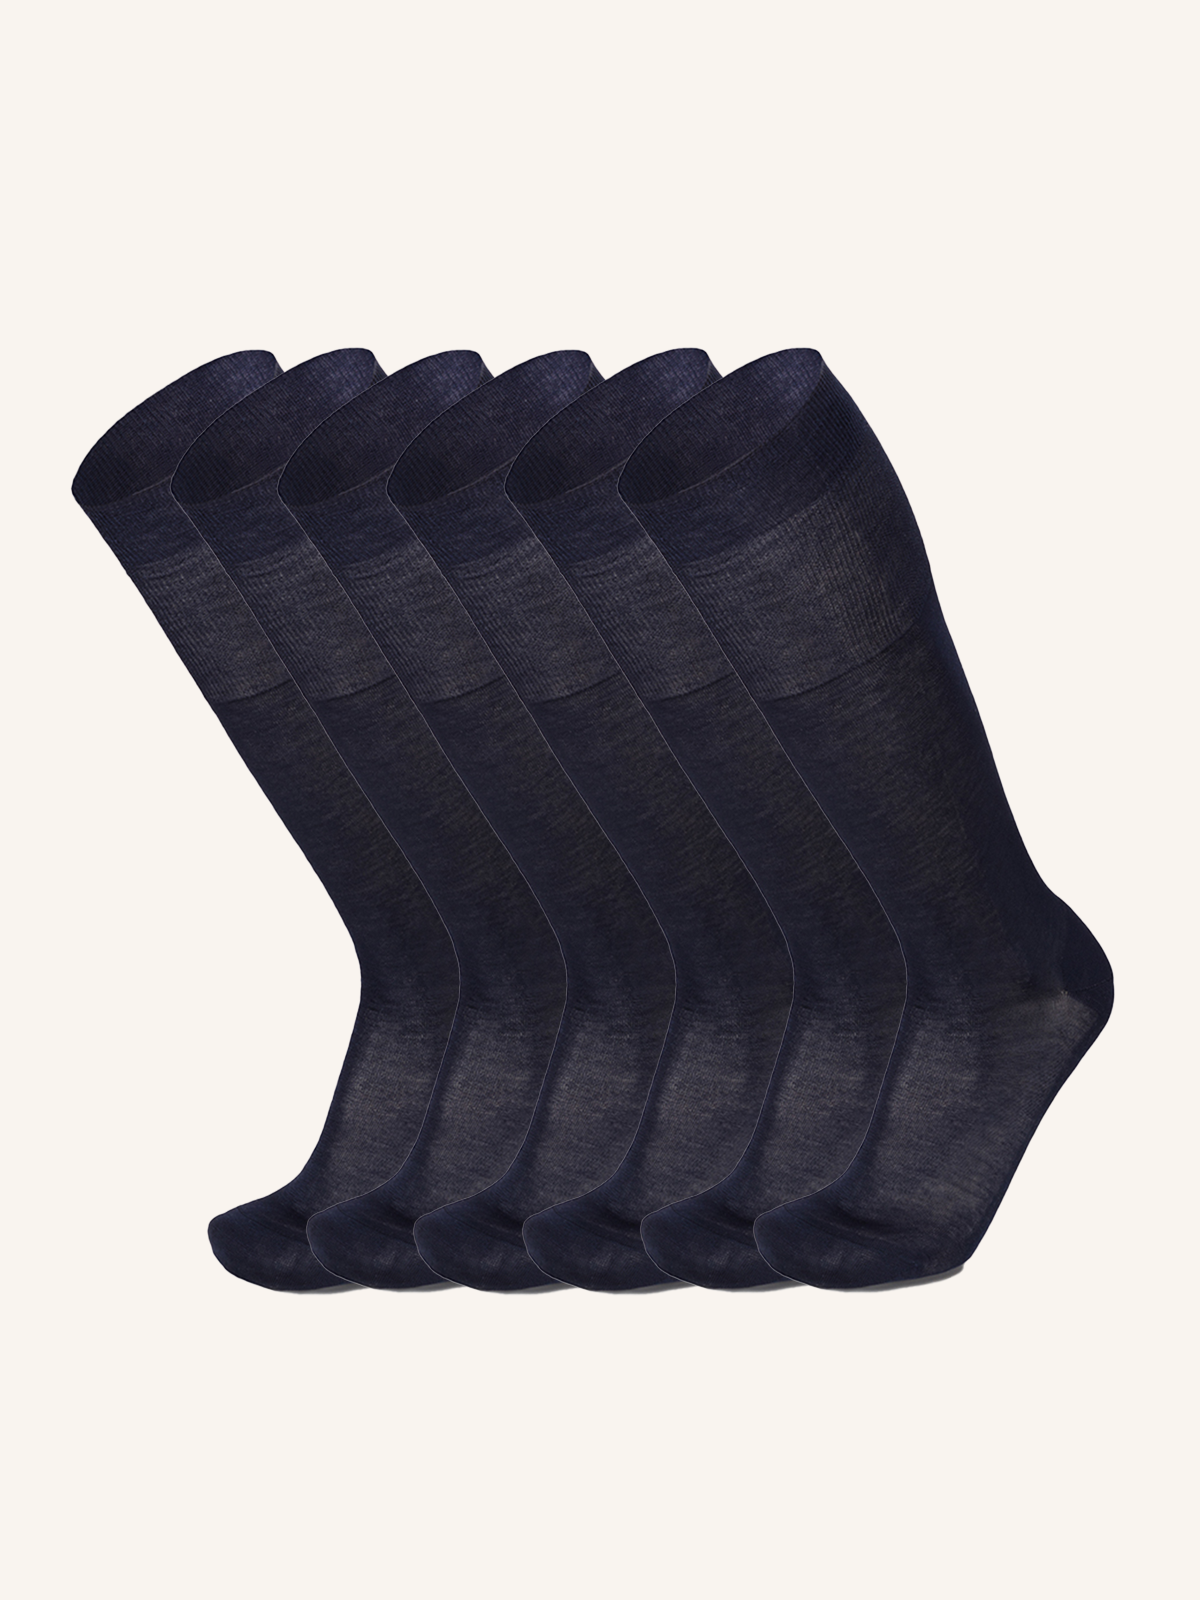 Long Socks in Stretch Cotton Lisle for Men | Plain Color | Pack of 6 pairs | Imperial RL